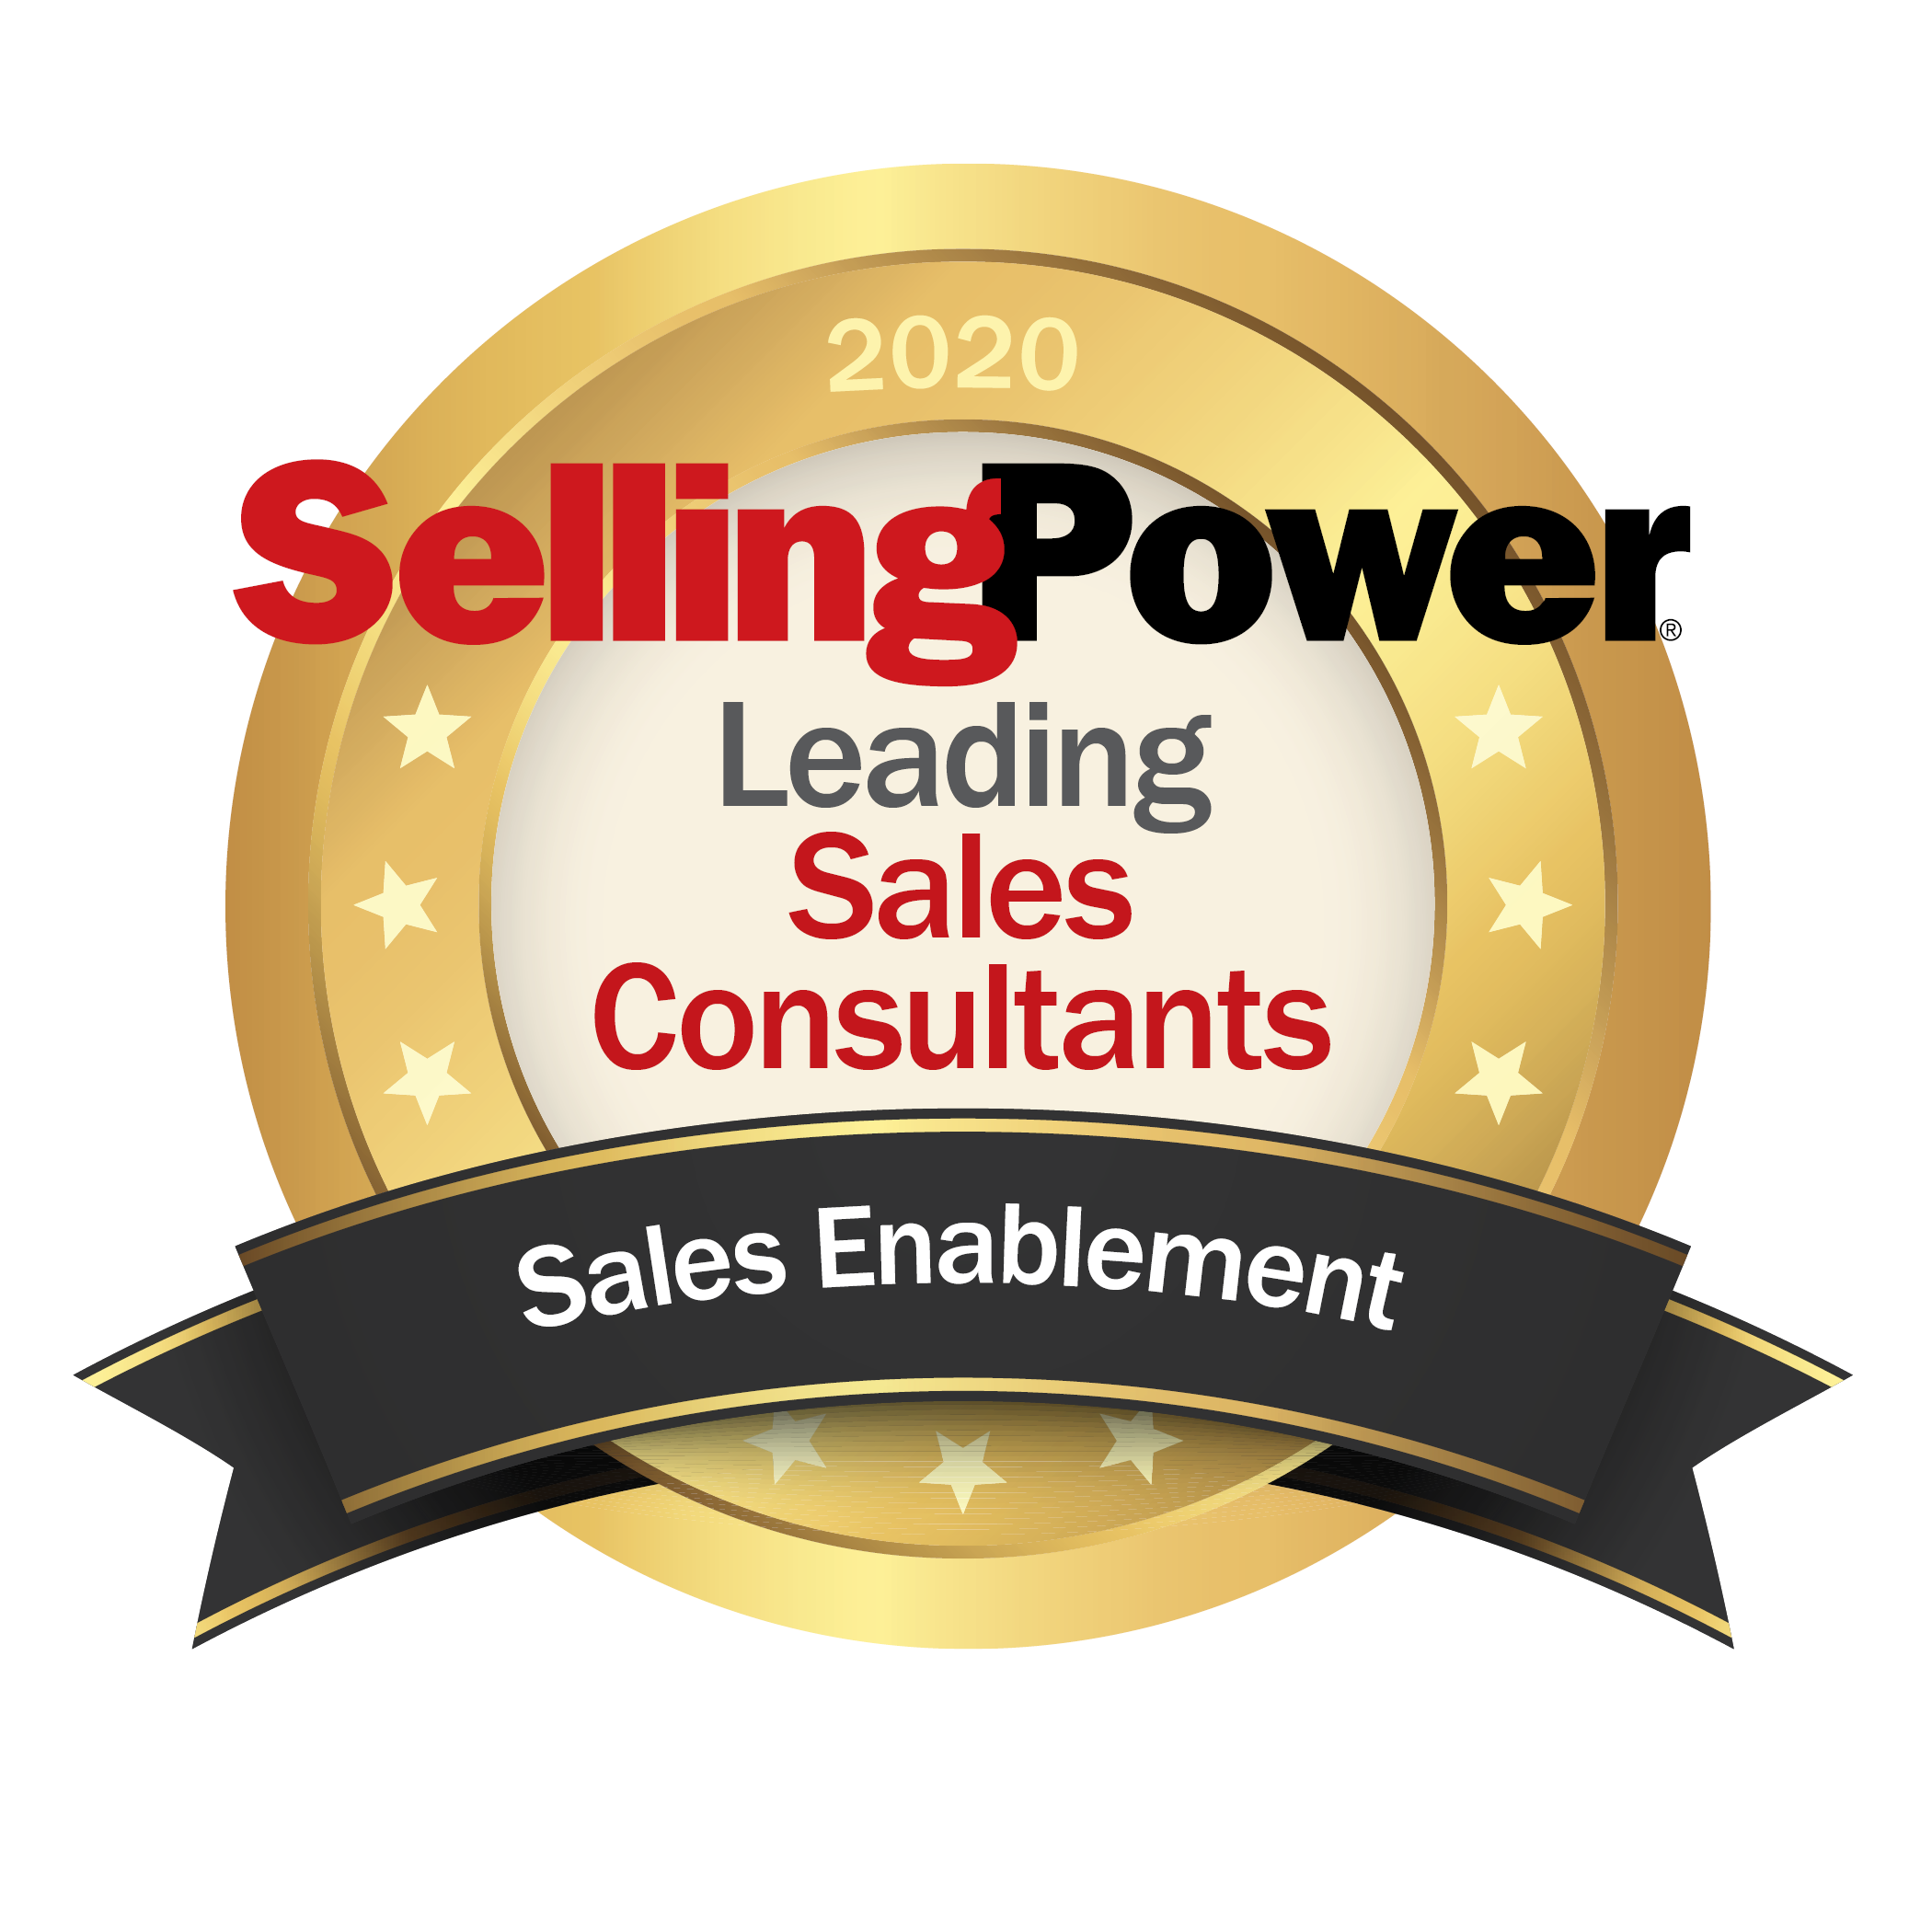 Logo for Selling Power list of Leading Sales Consultants in 2020